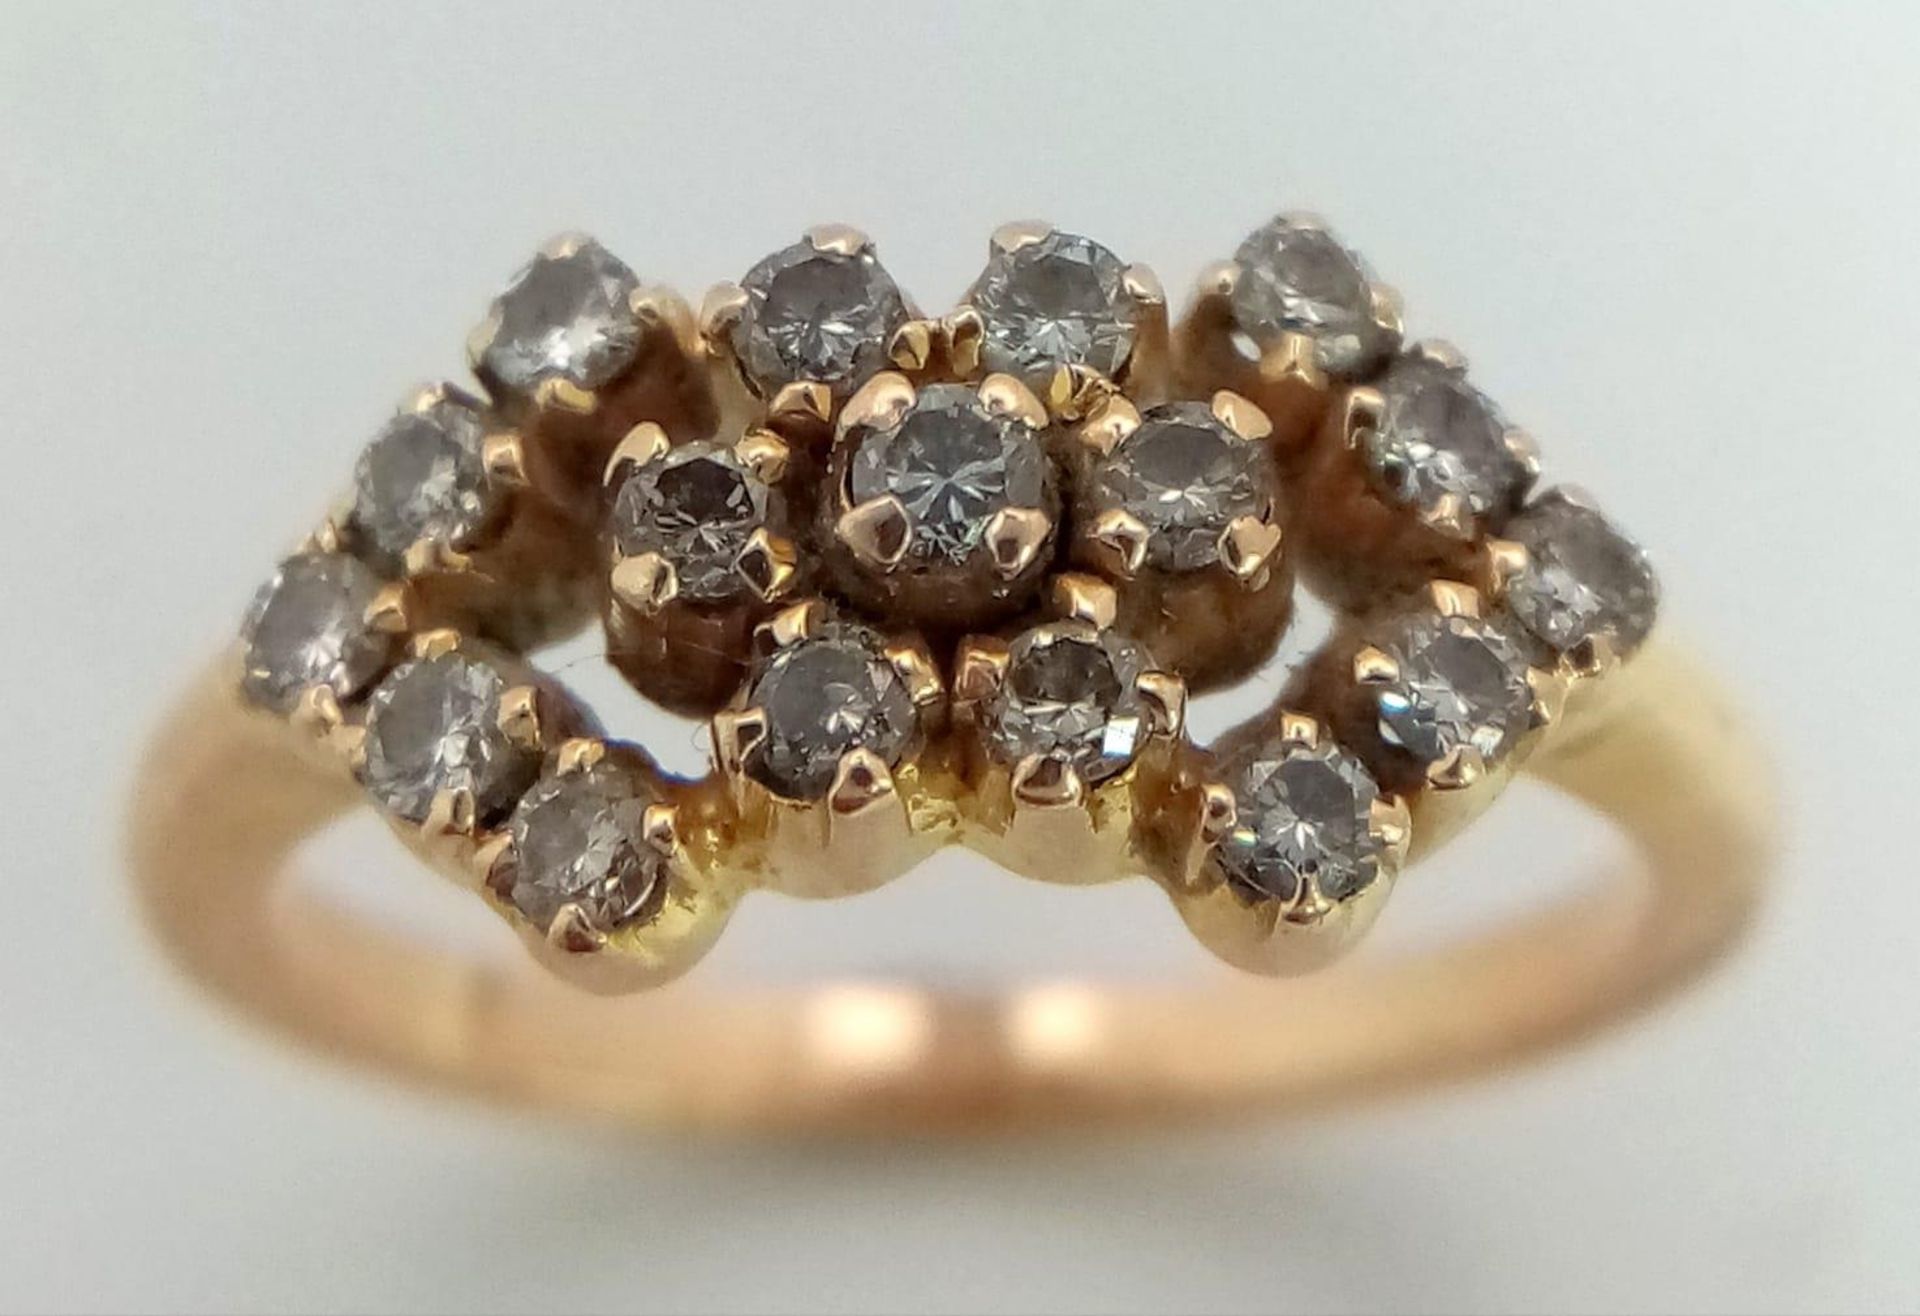 18K YELLOW GOLD DIAMOND FANCY CLUSTER RING. 0.35CT DIAMOND. TOTAL WEIGHT 3.1G. SIZE M - Image 3 of 3